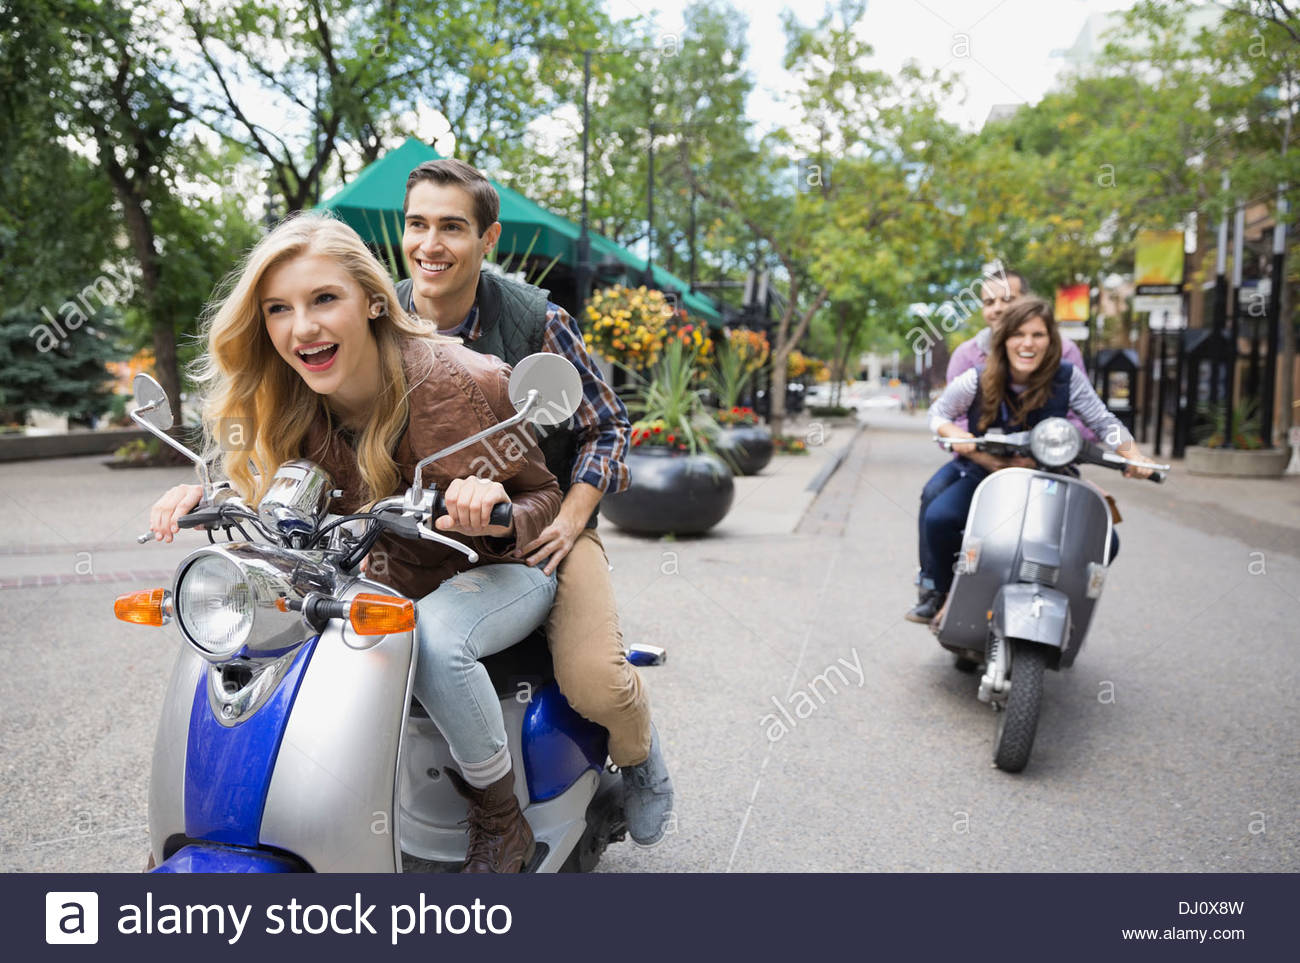 Two couples riding scooters on city street Stock Photo